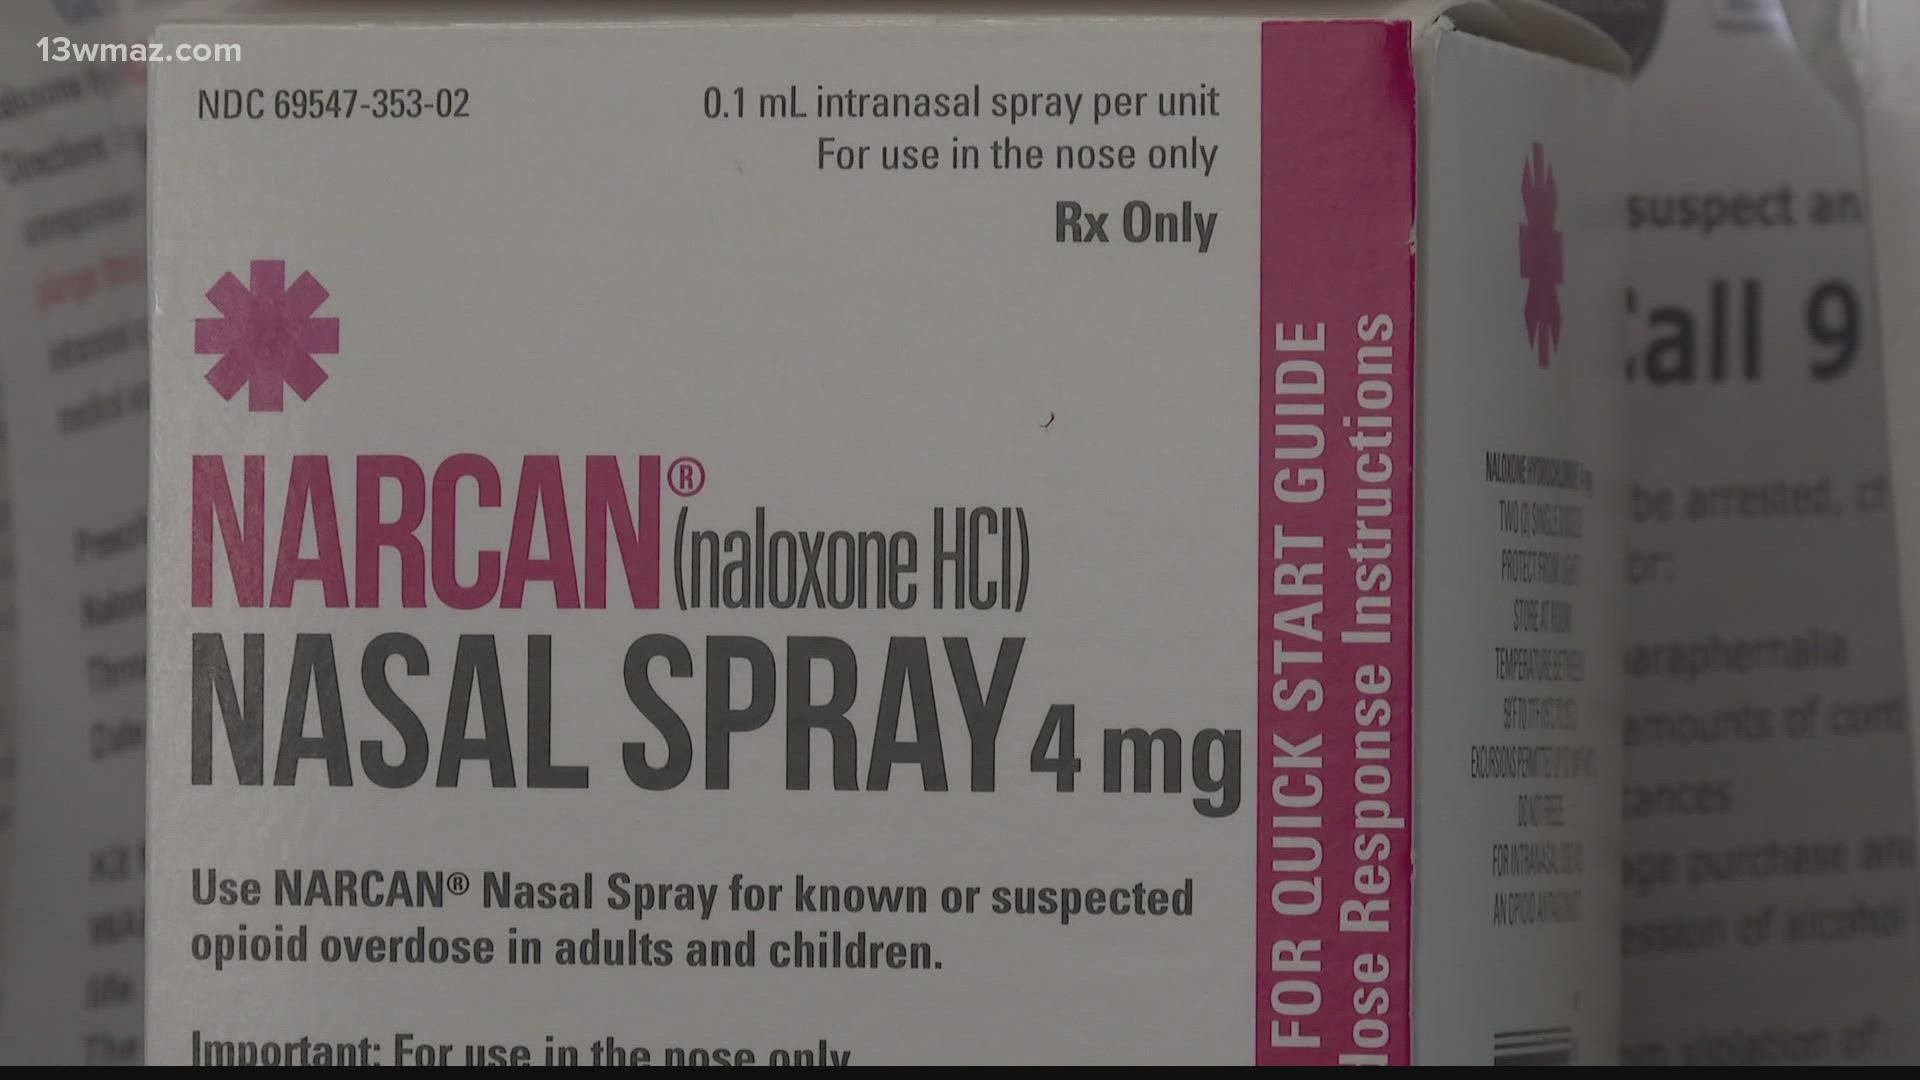 Narcan can last 30 to 90 minutes before a victim could fall back into overdose. That give enough time for medical help to arrive.